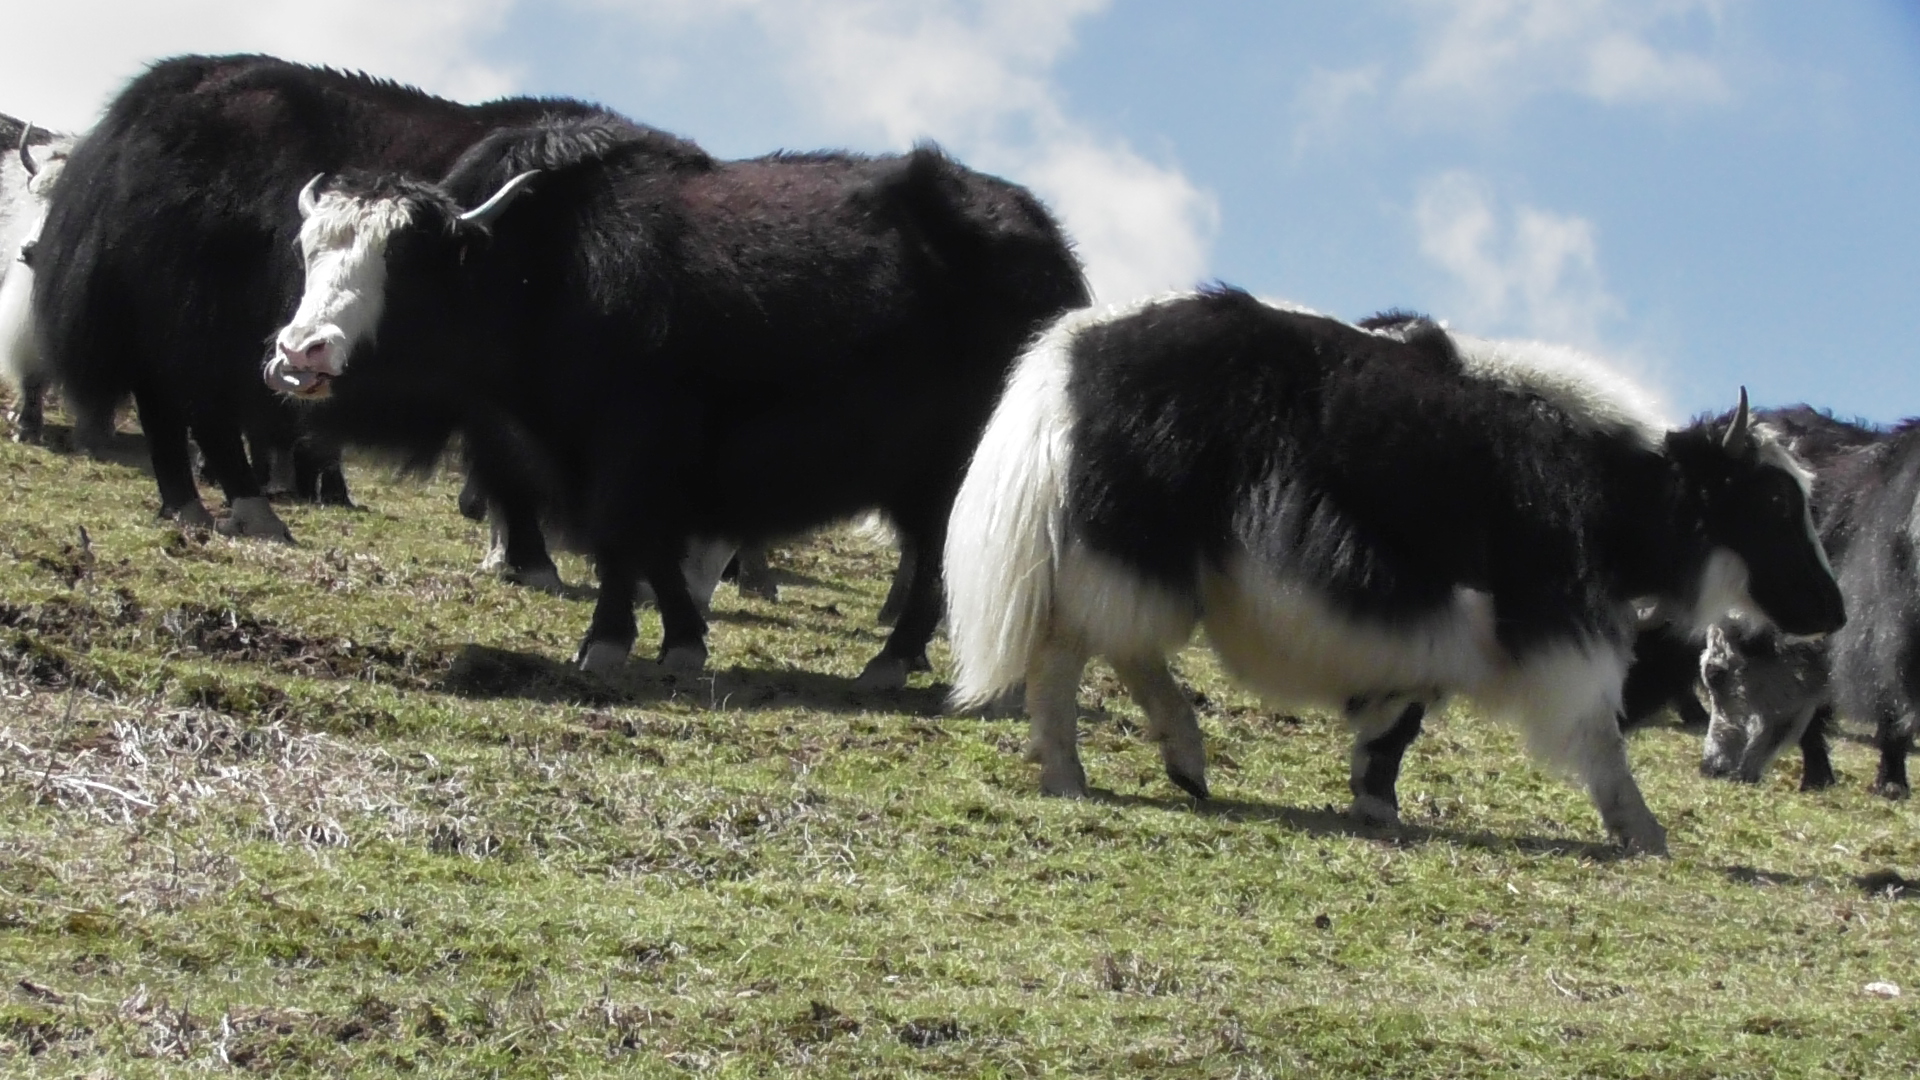 Yaks pictured in pasture at Char Rate in Panchthar district of Province 1. Photo: Laxmi Gautam/THT